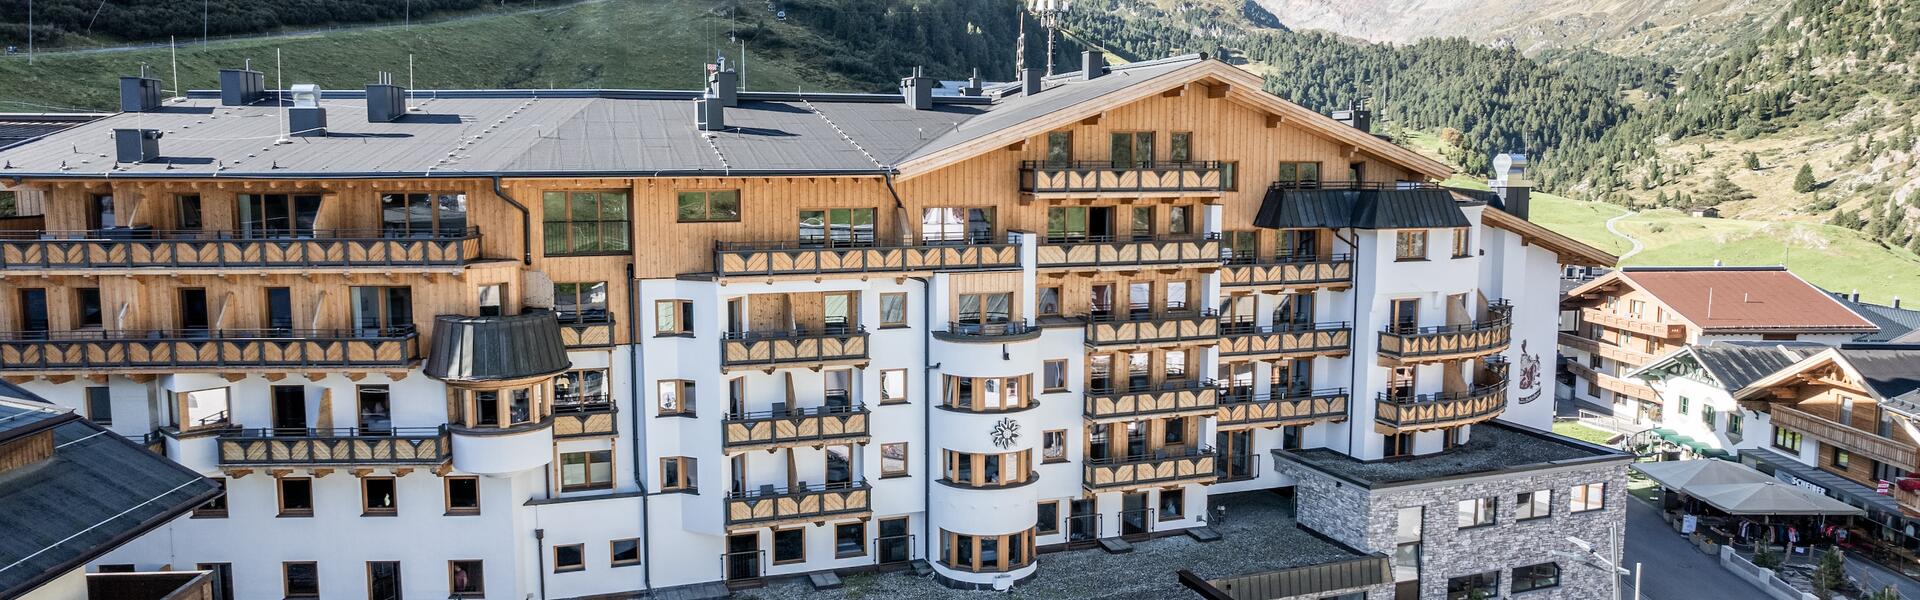 Summer holiday at the Hotel Edelweiss & Gurgl